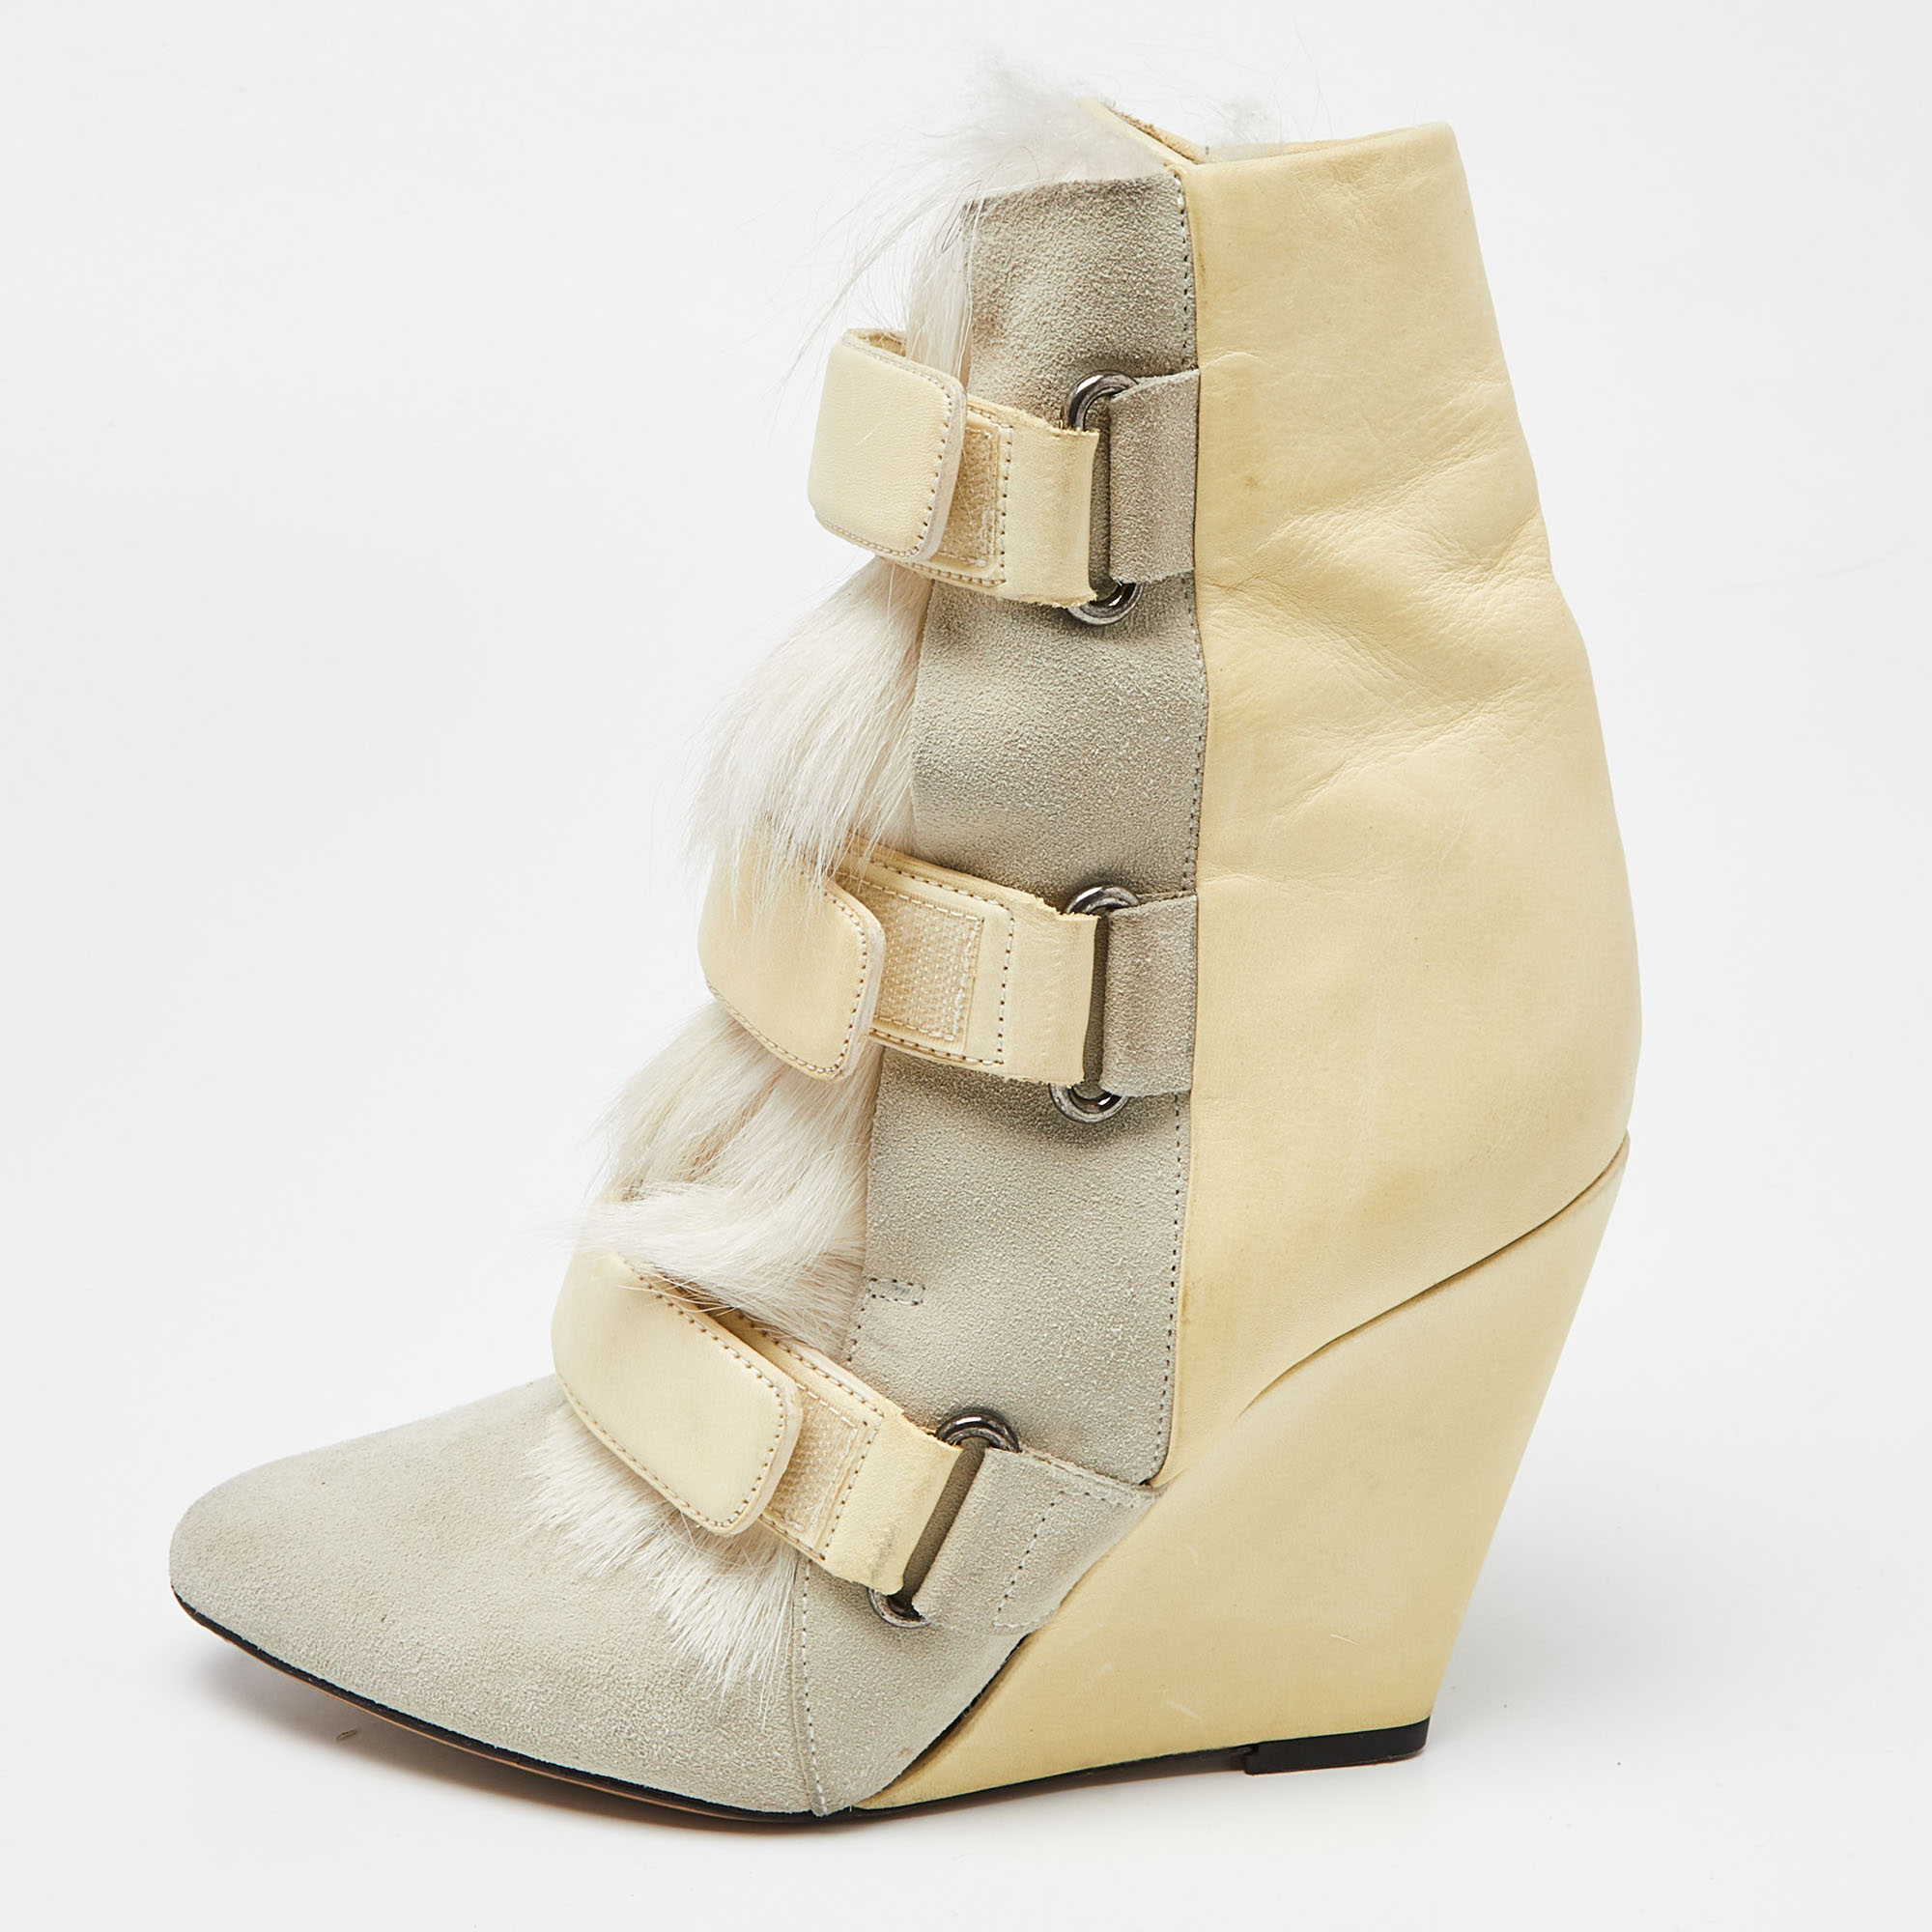 Isabel Marant Tricolor Leather And Calf Hair Pierce Wedge Ankle Boots Size 38